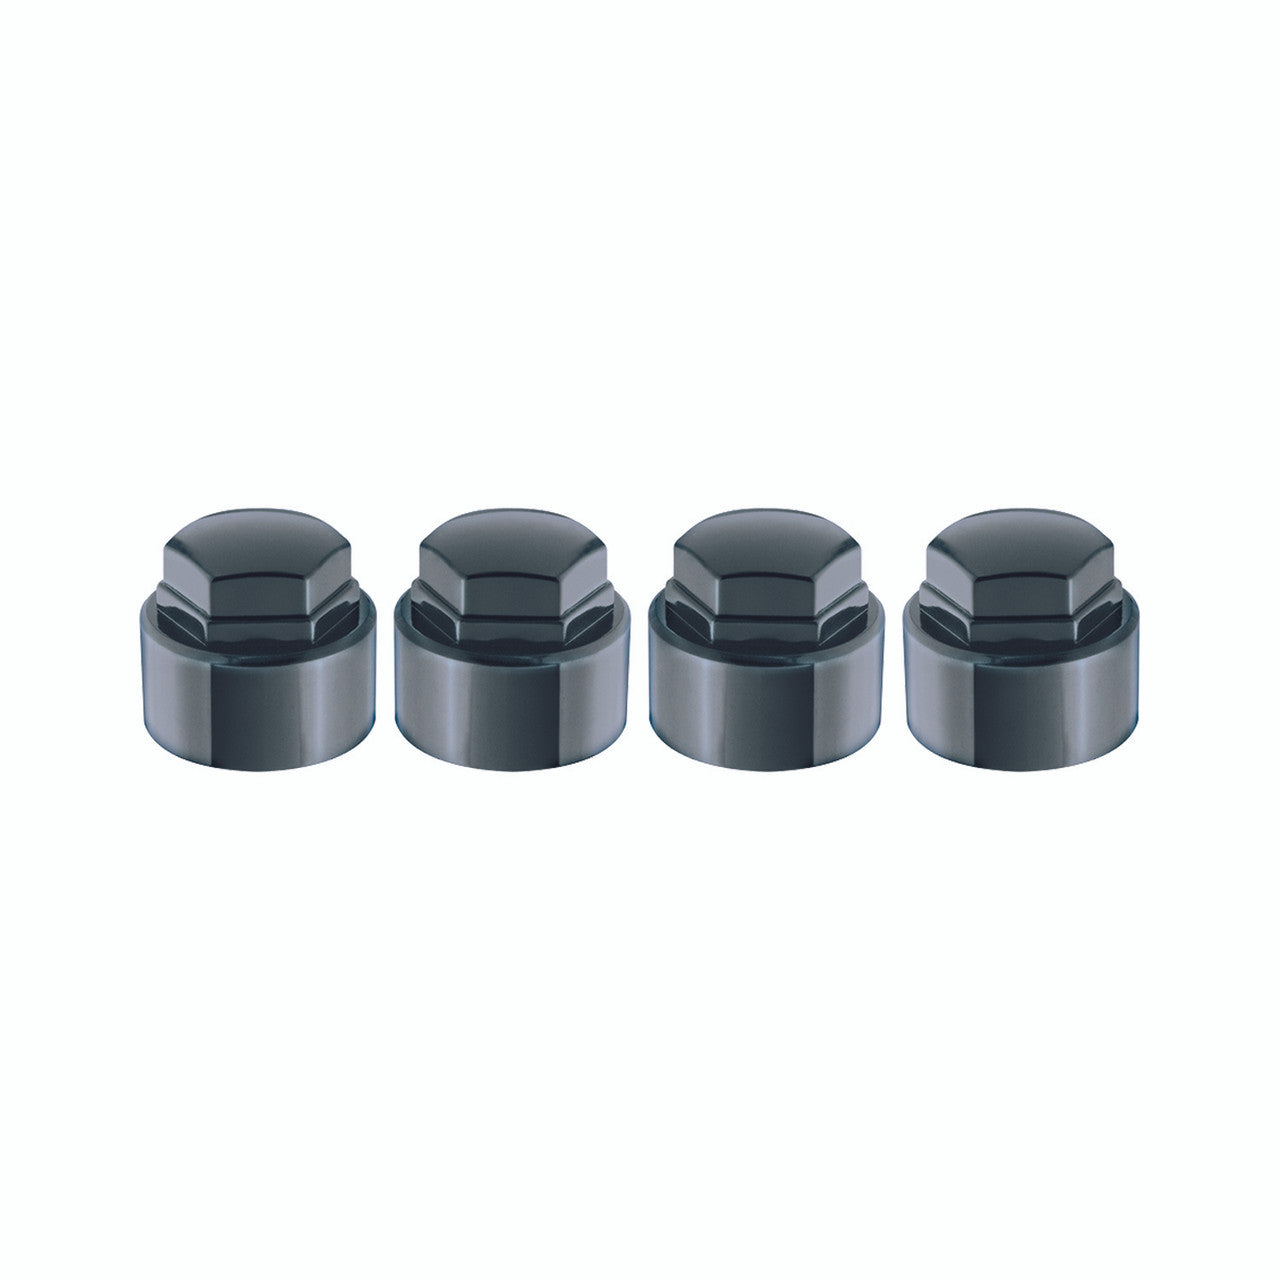 Black Nylon Caps- For use with PN- 24010-24013 70005